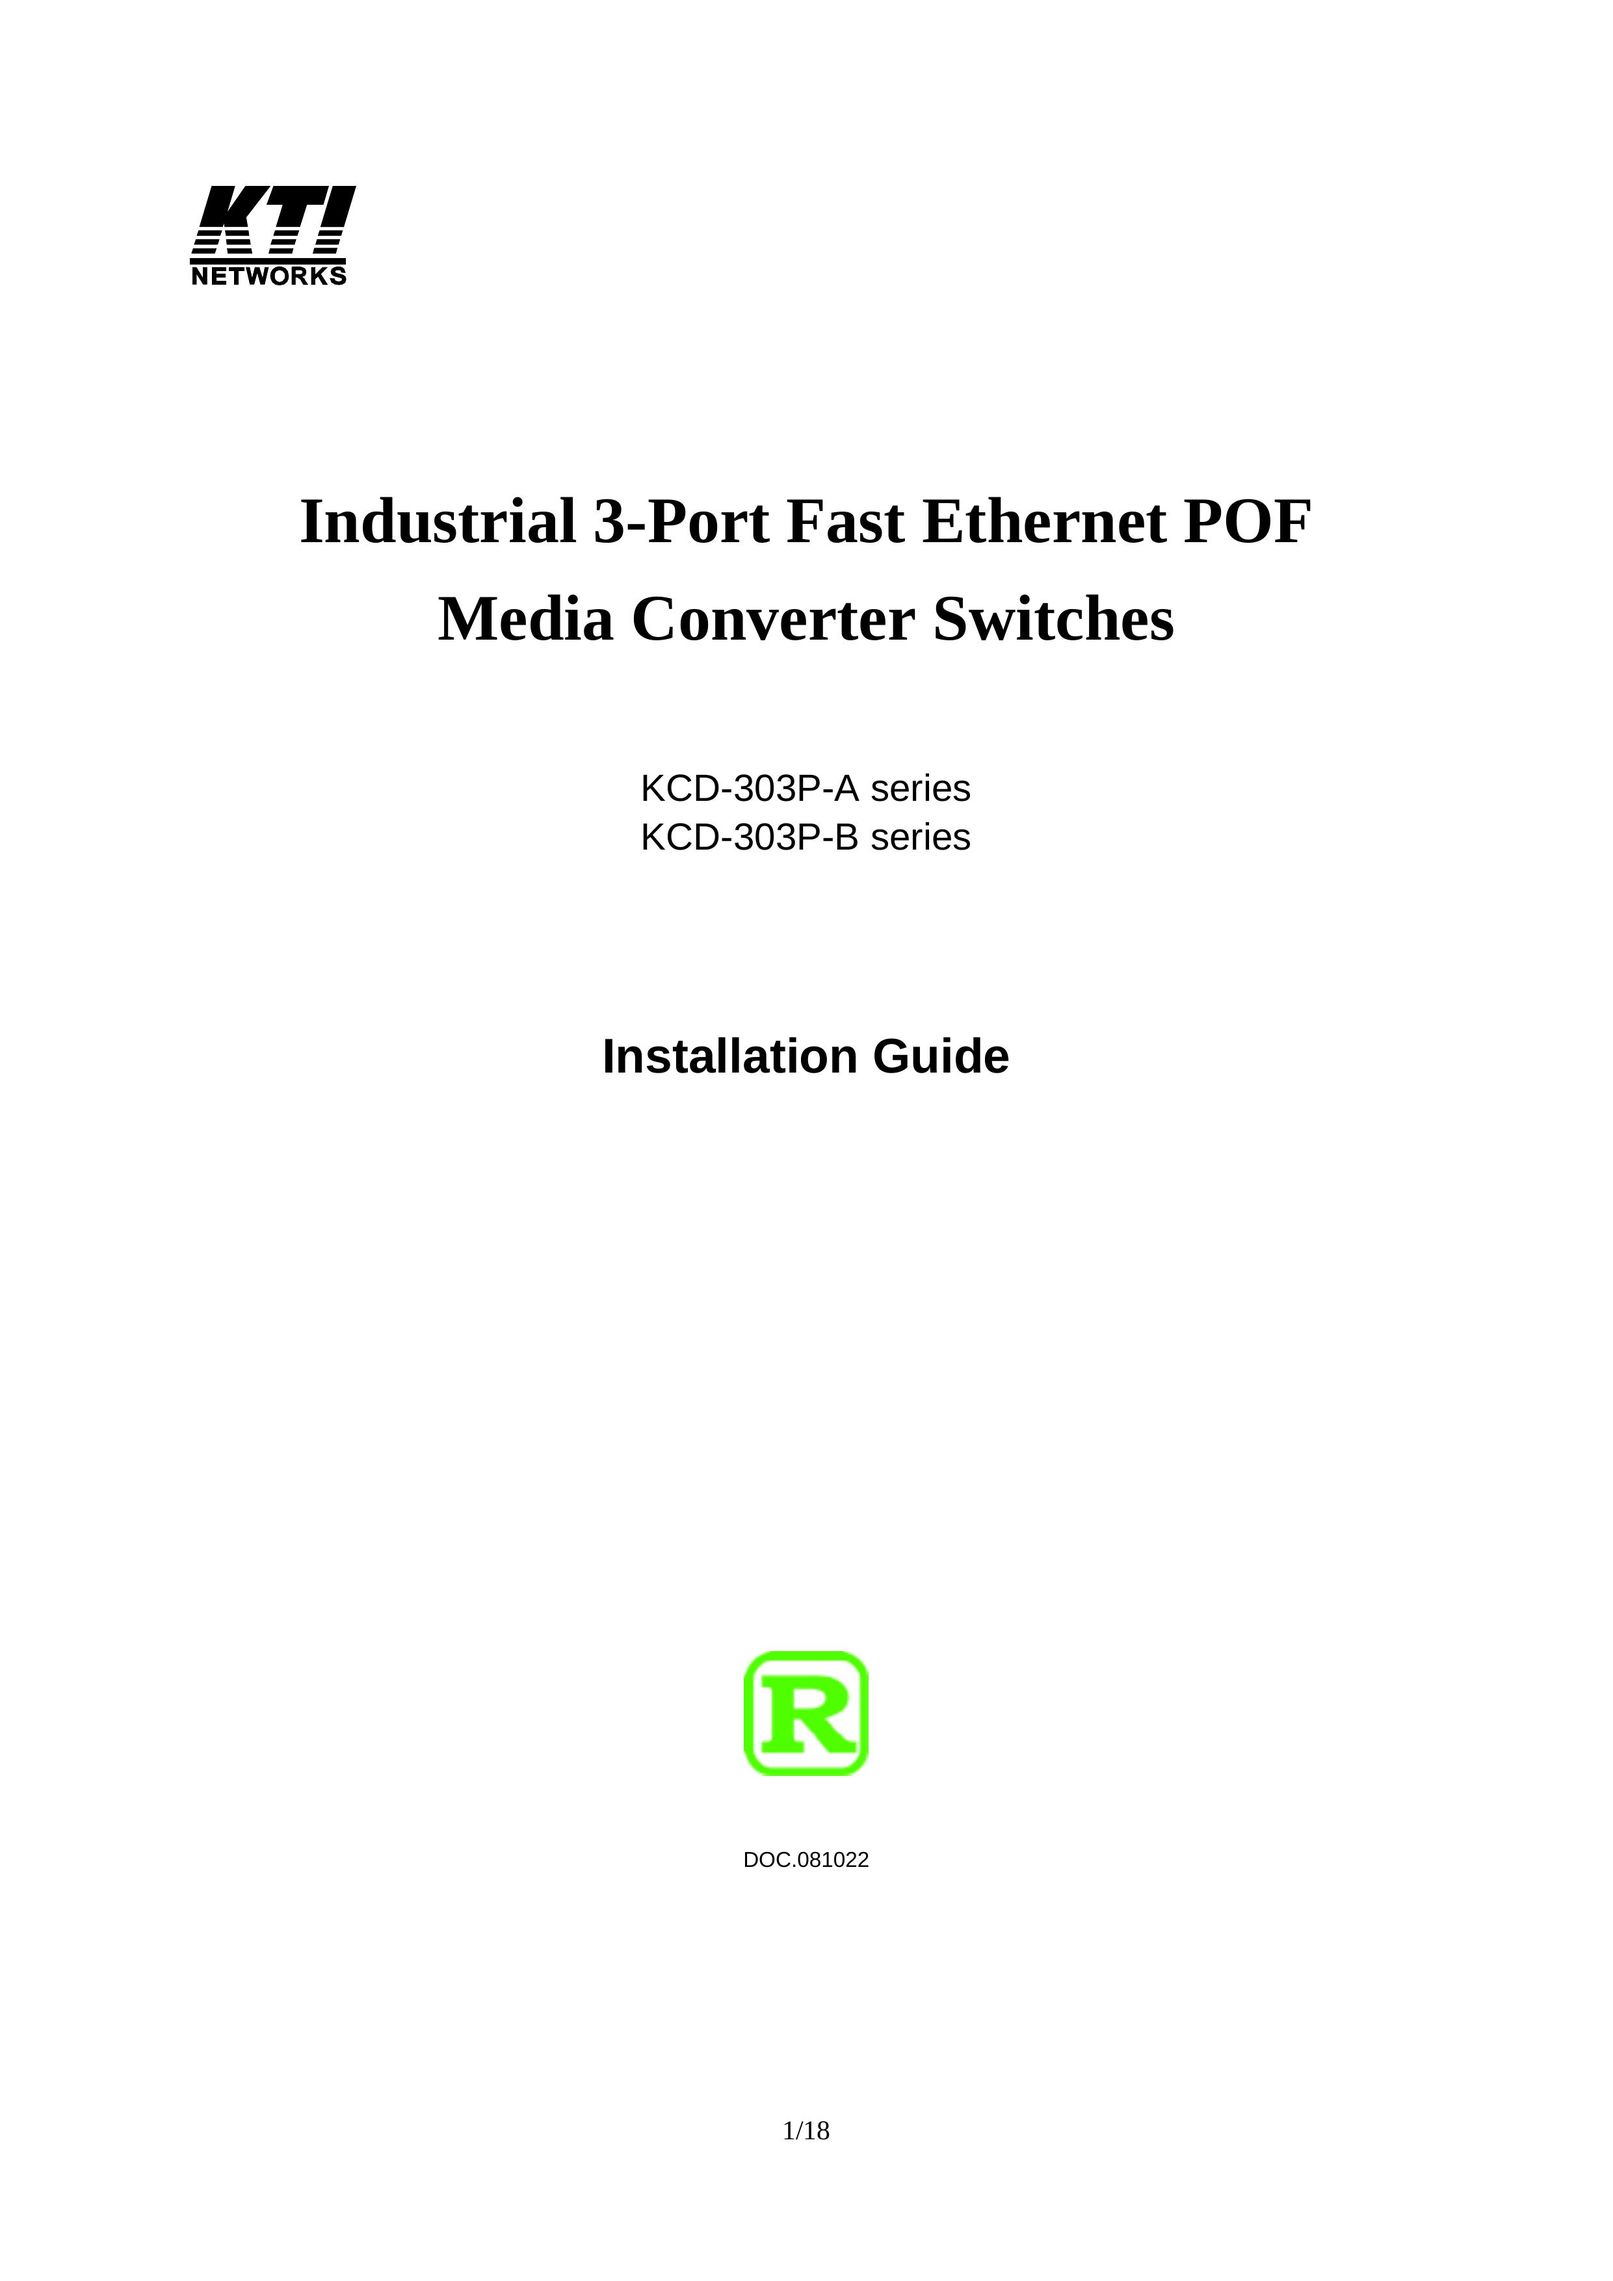 KTI Networks KCD-303P-A2 Switch User Manual